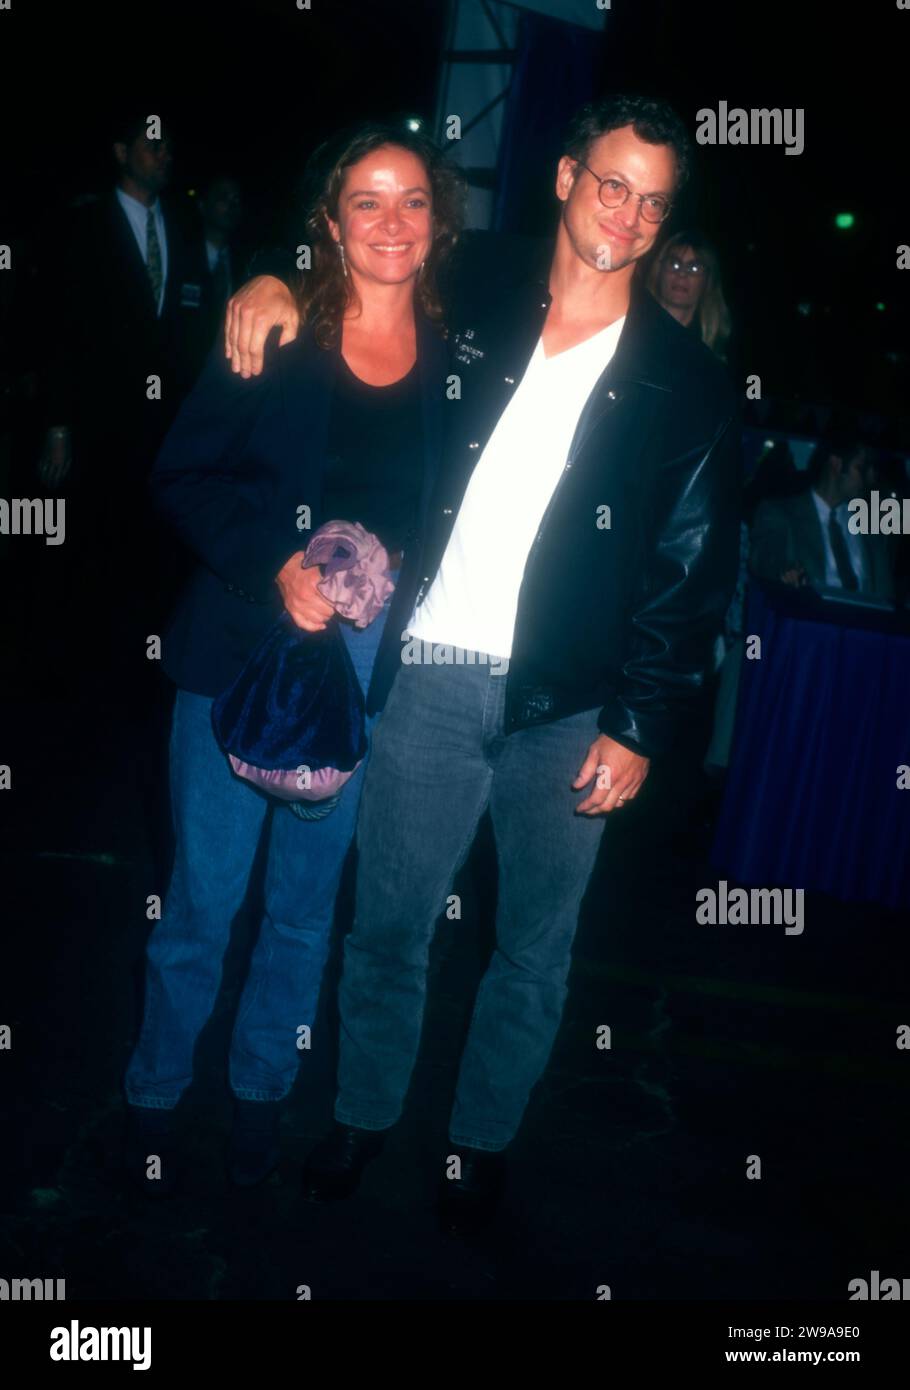 Century City, California, USA 30th September 1996 Actor Gary Sinise and wife Moira Harris attend 20th Century StudioÕs ÔThat Thing You DoÕ Premiere at Century City Cineplex Odeon Theaters on September 30, 1996 in Century City, California, USA. Photo by Barry King/Alamy Stock Photo Stock Photo